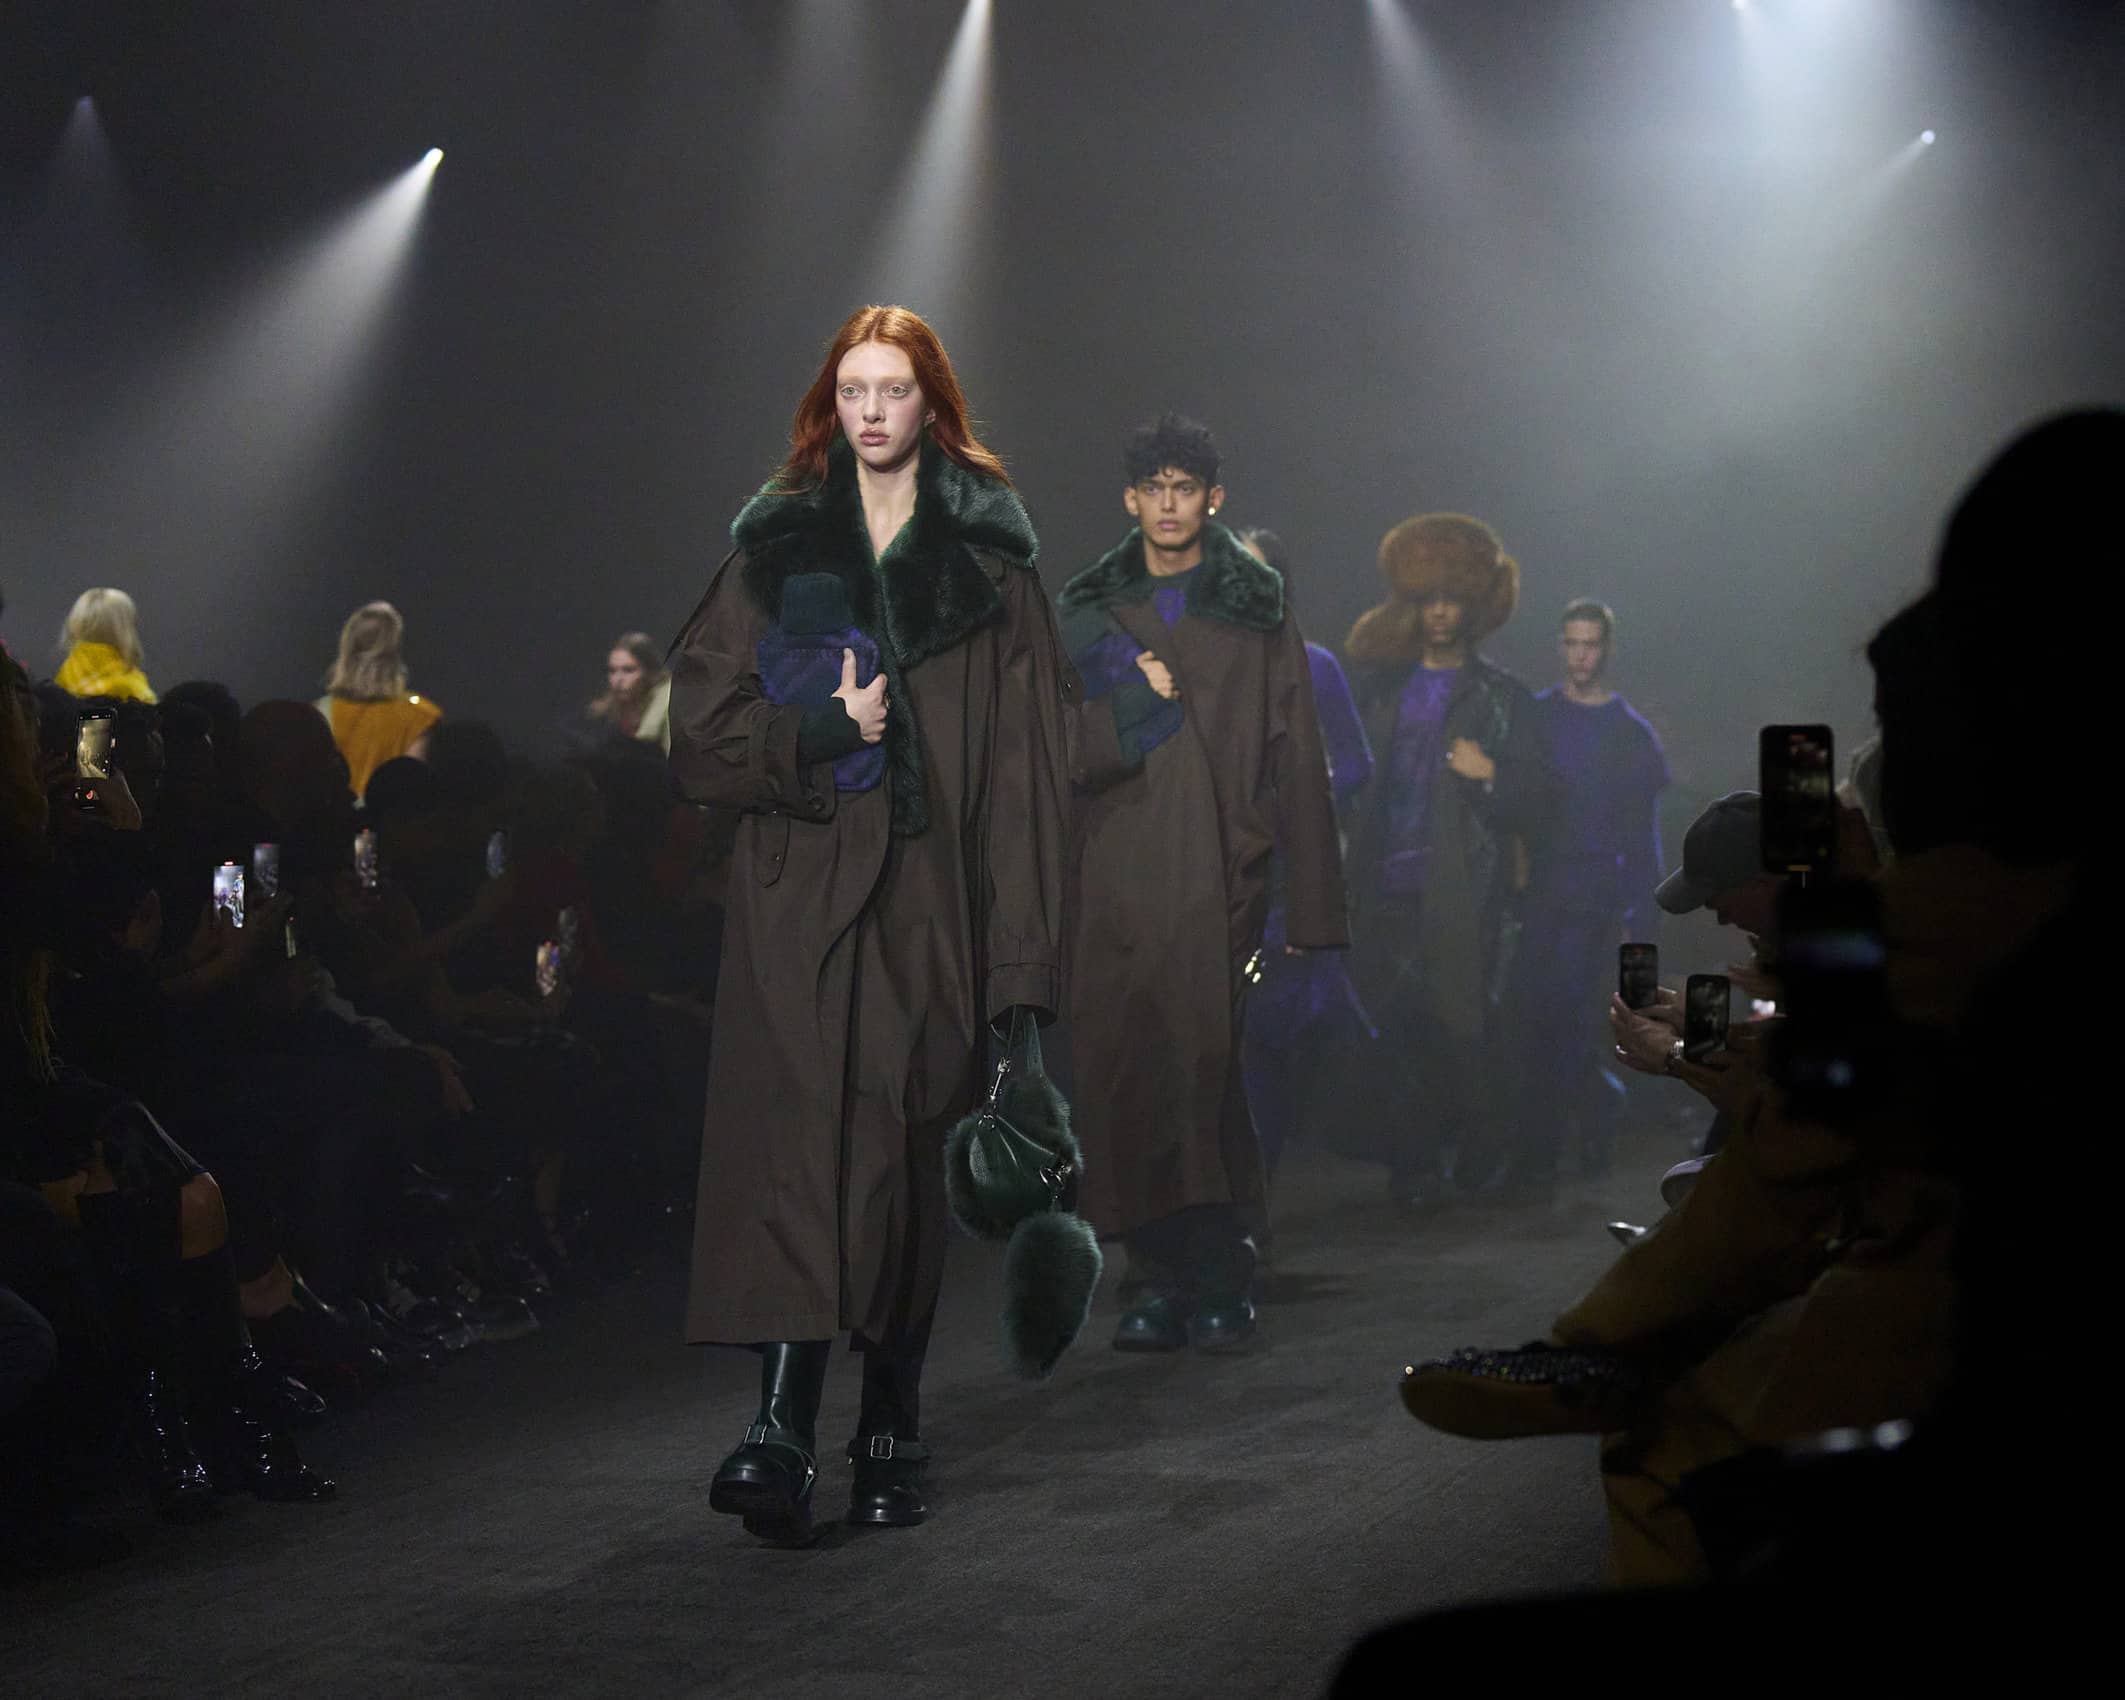 Ralph Lauren's 2022 fashion show brings home coziness to stage